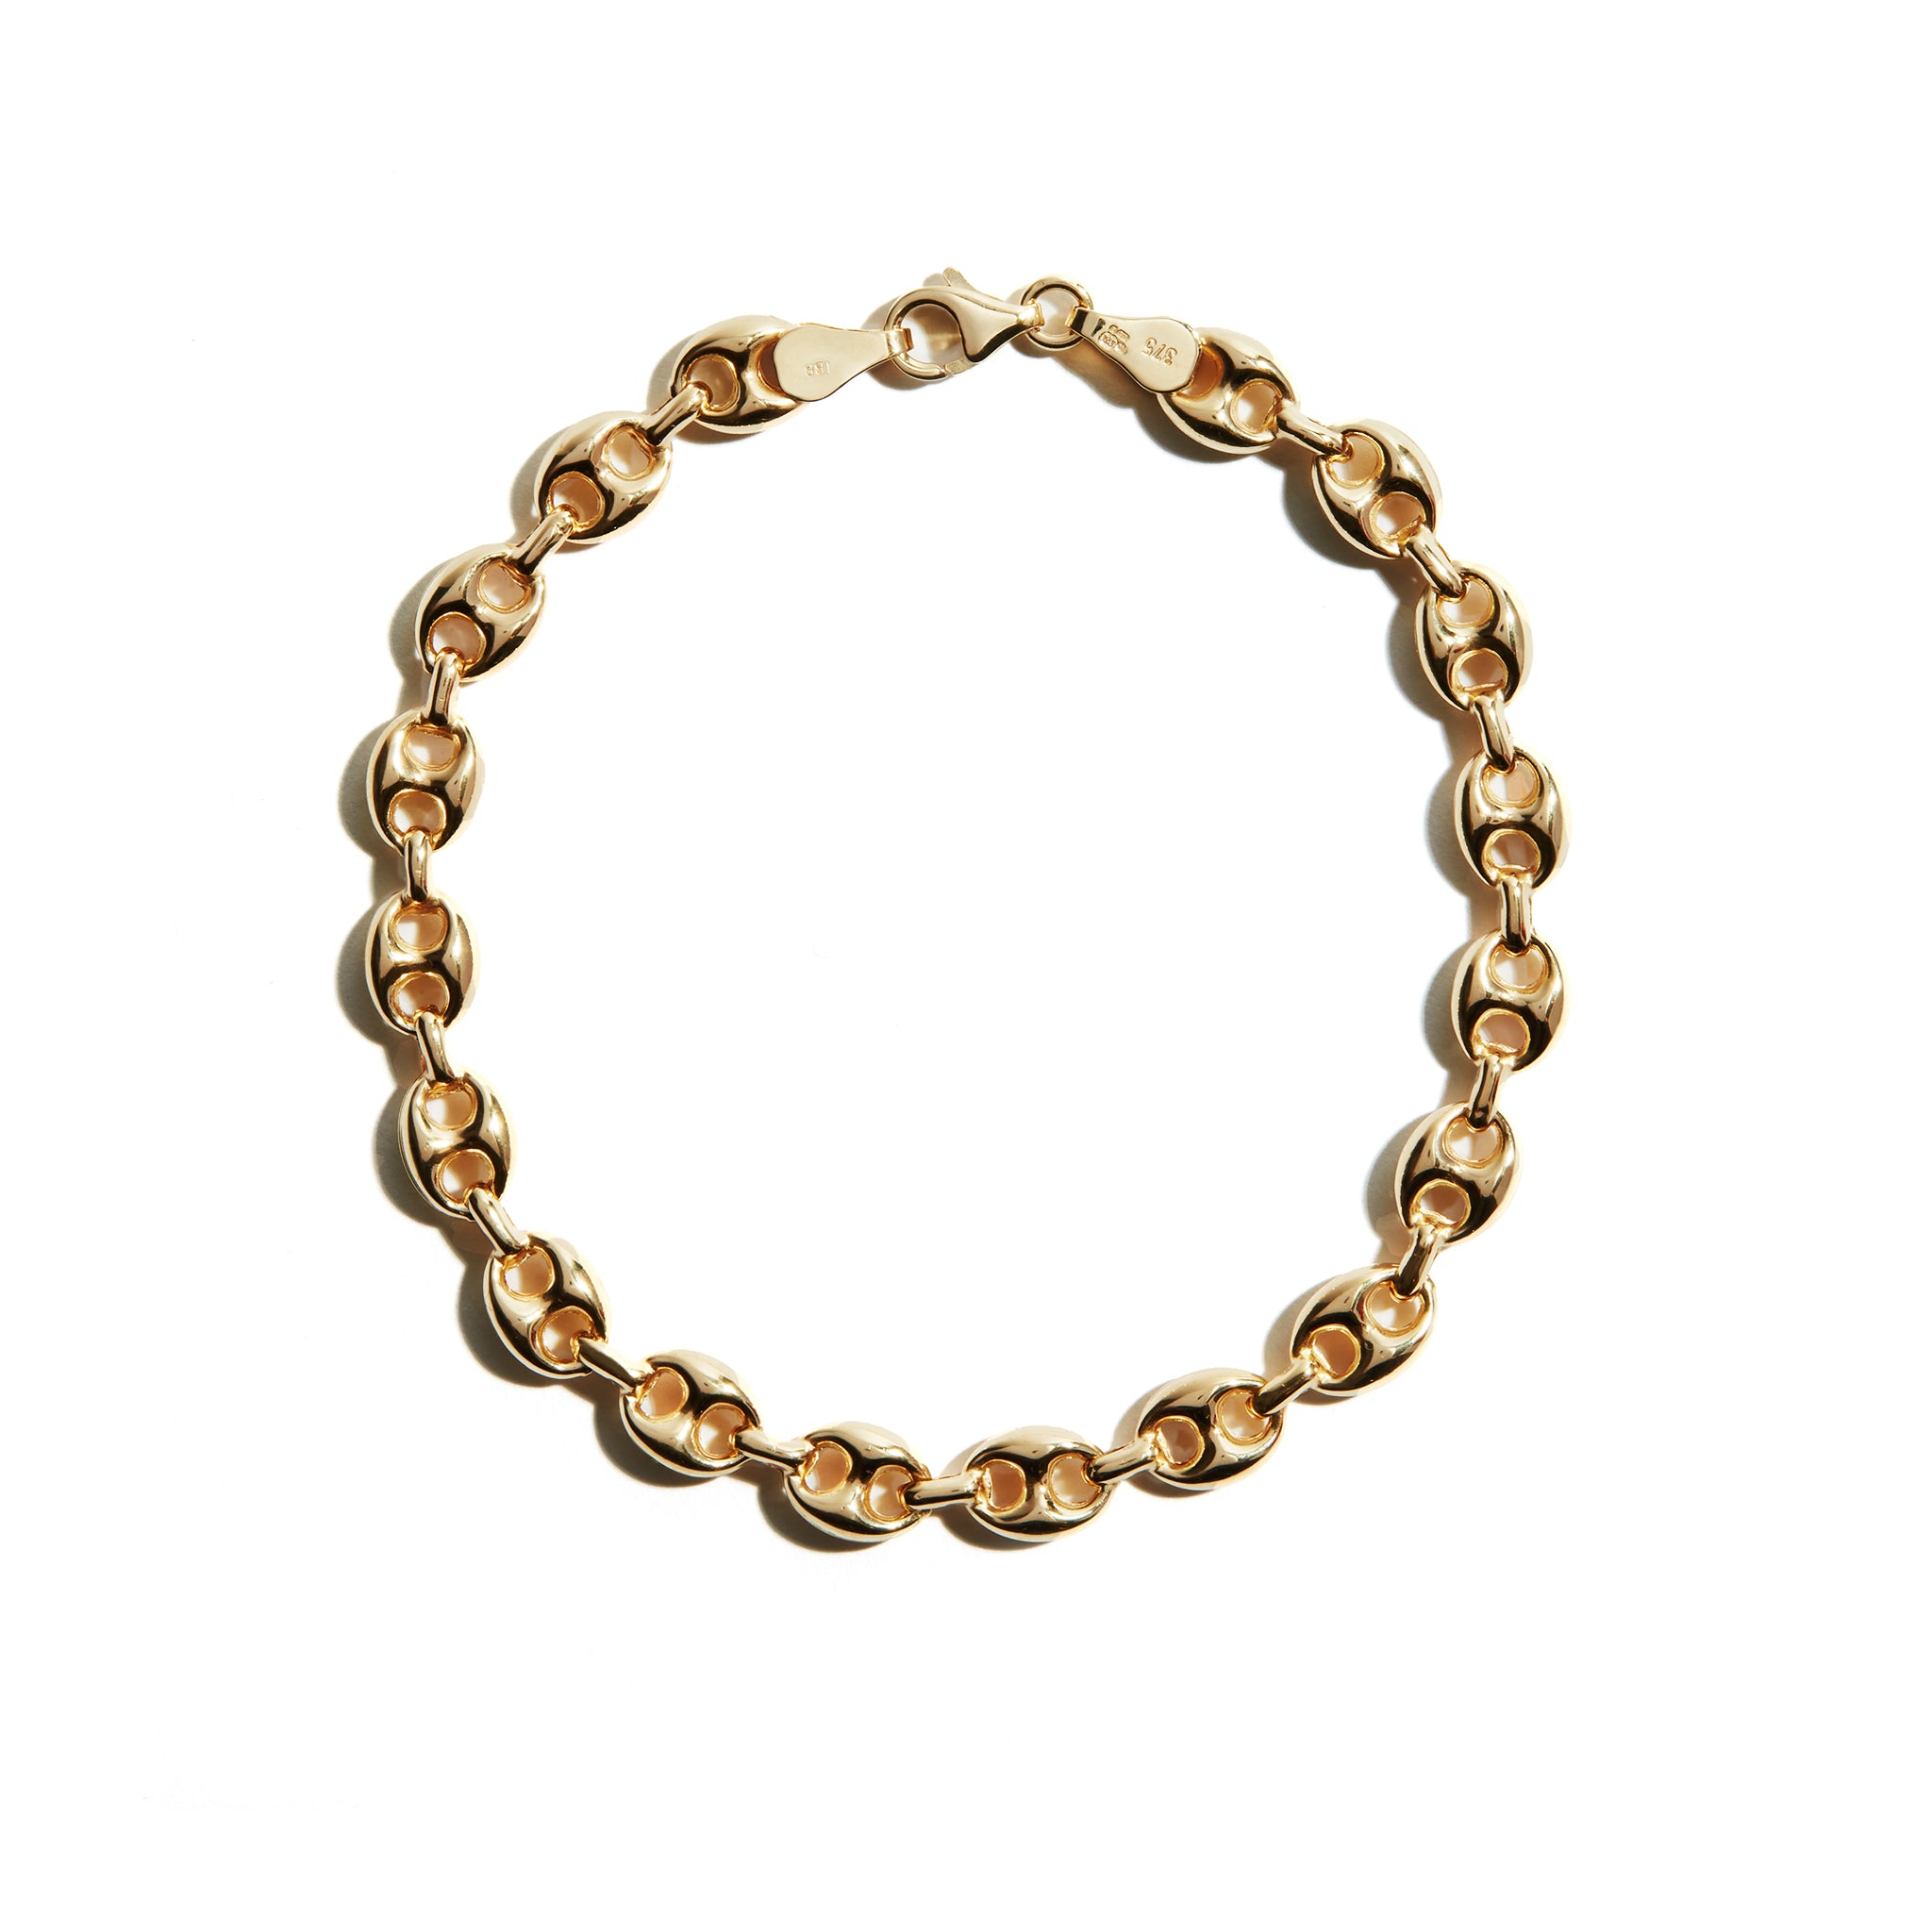 A bold Rambo Chain Bracelet crafted from 9 Carat Gold, showcasing thick link chains for a stylish statement.